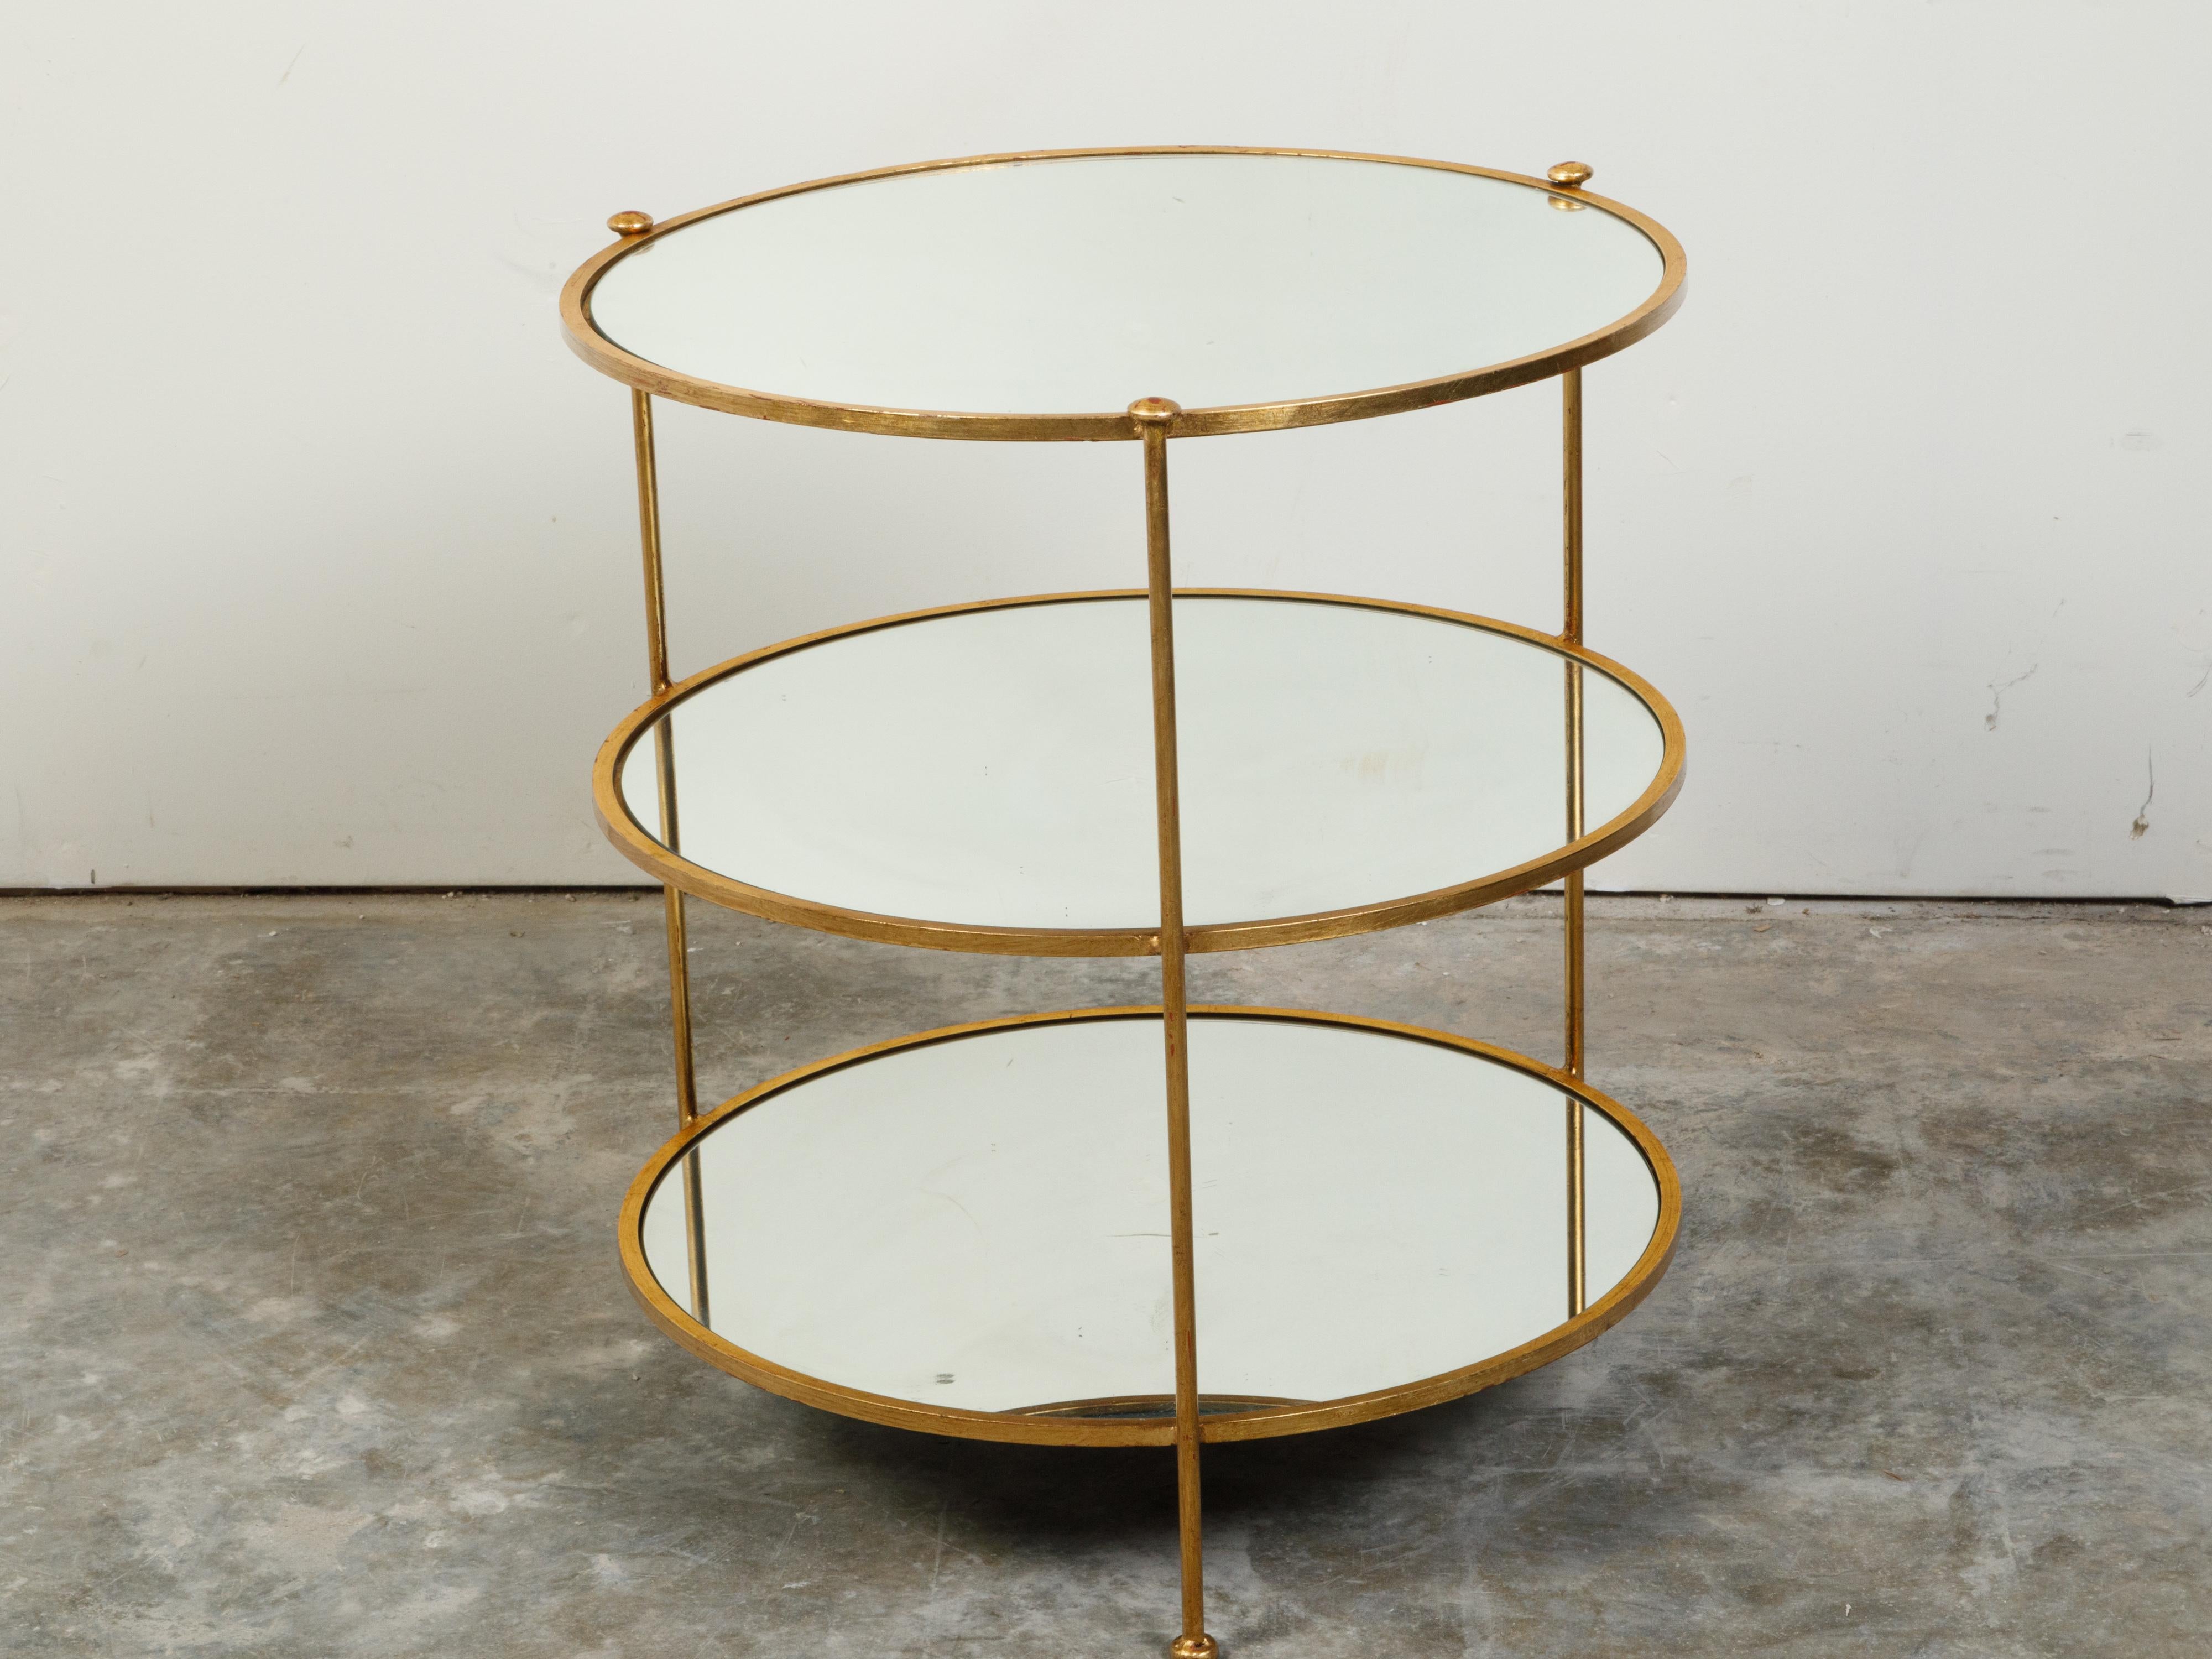 Italian Midcentury Gilt Iron Three-Tier Side Table with Round Mirrored Shelves In Good Condition For Sale In Atlanta, GA